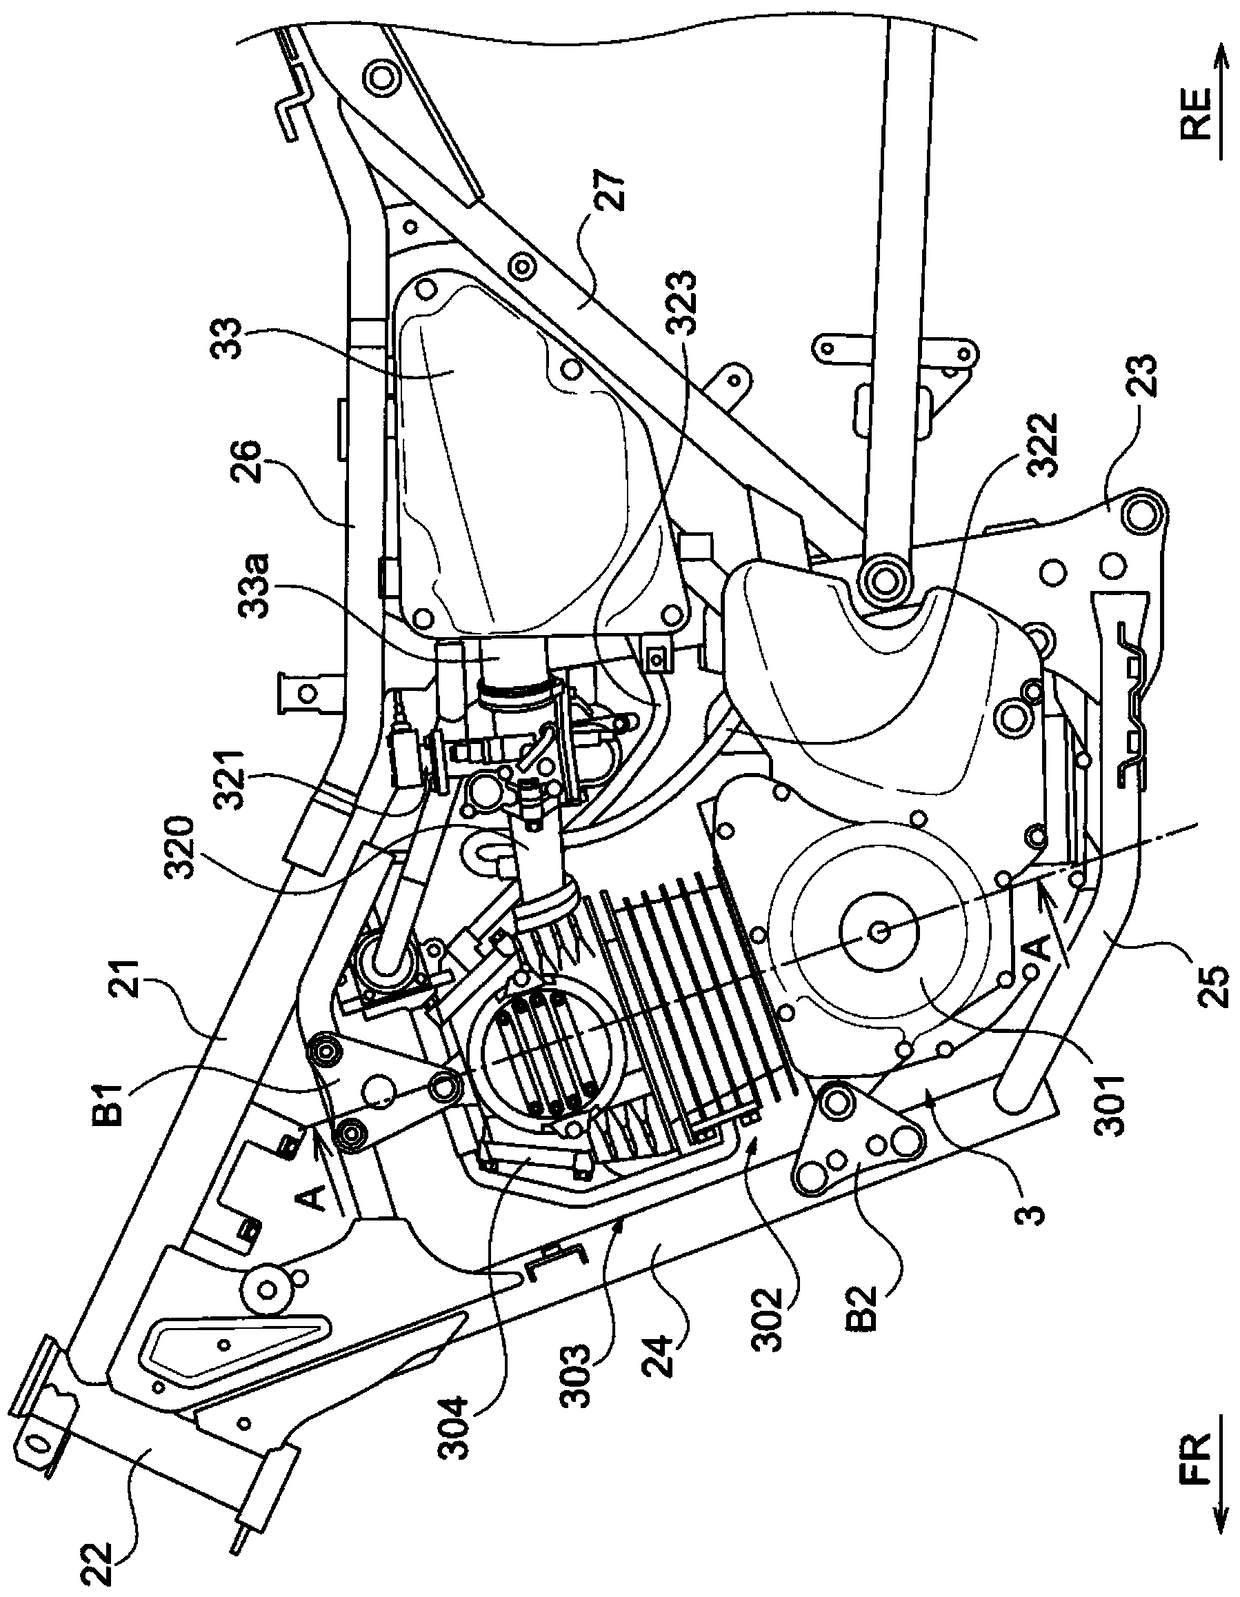 Blow-by ventilation device for internal combustion engine